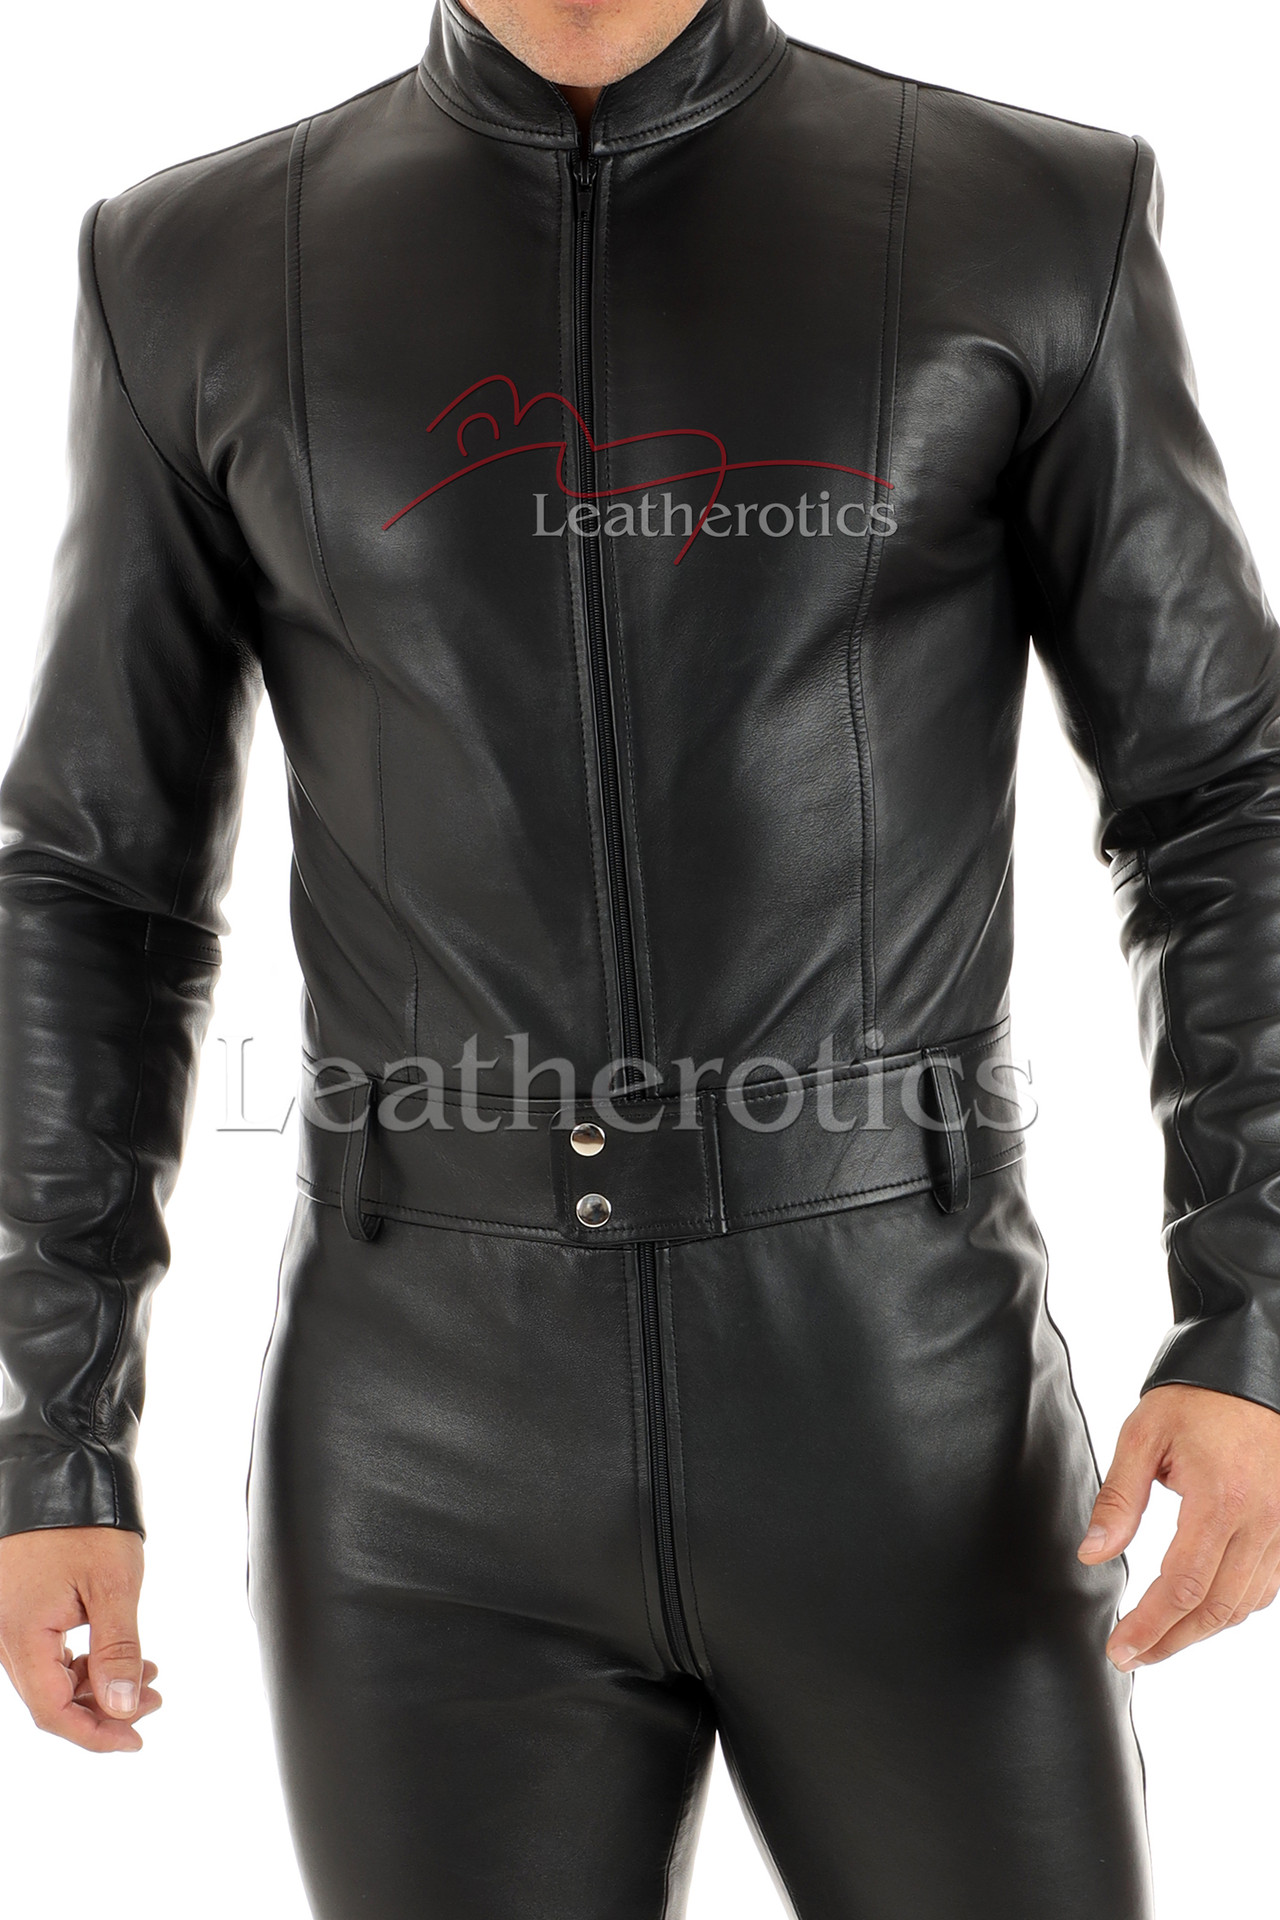 Men's leather suit | made to order catsuit | leather playsuit gimpsuit